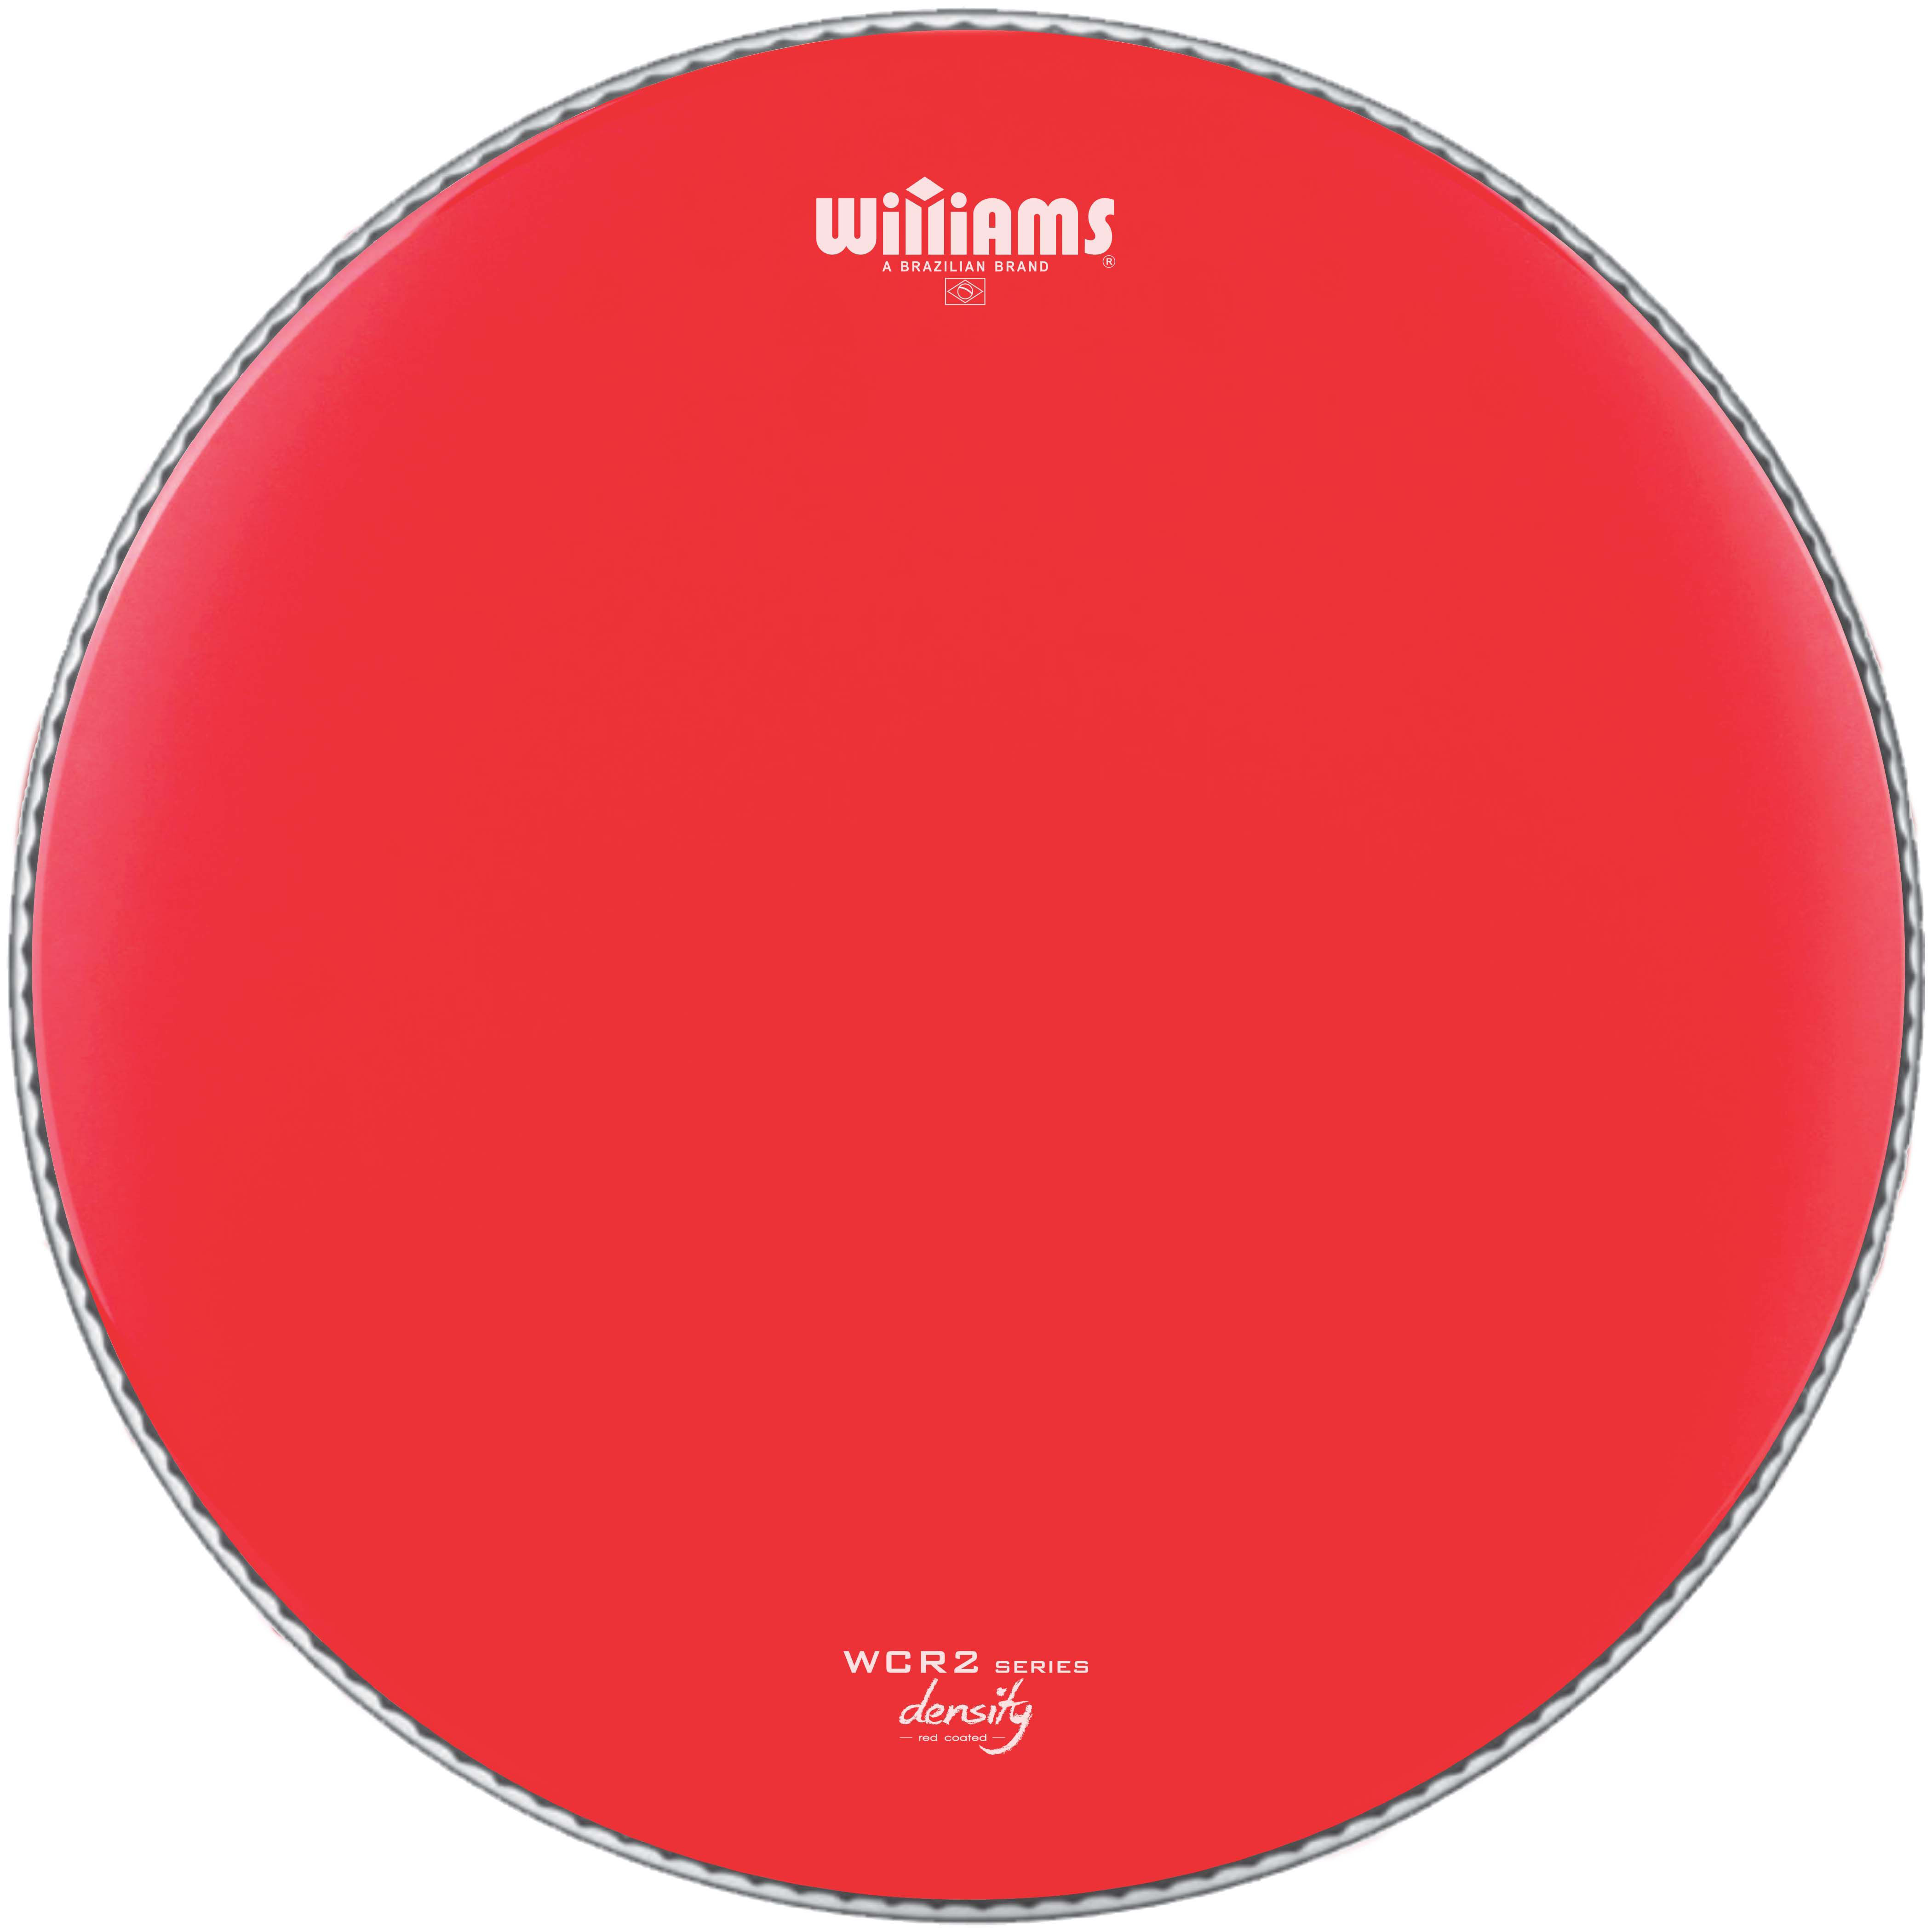 Williams WCR2-10MIL-14 Double Ply Coated Oil Density RED Series 14", 10-MIL Пластики для малого барабана и томов